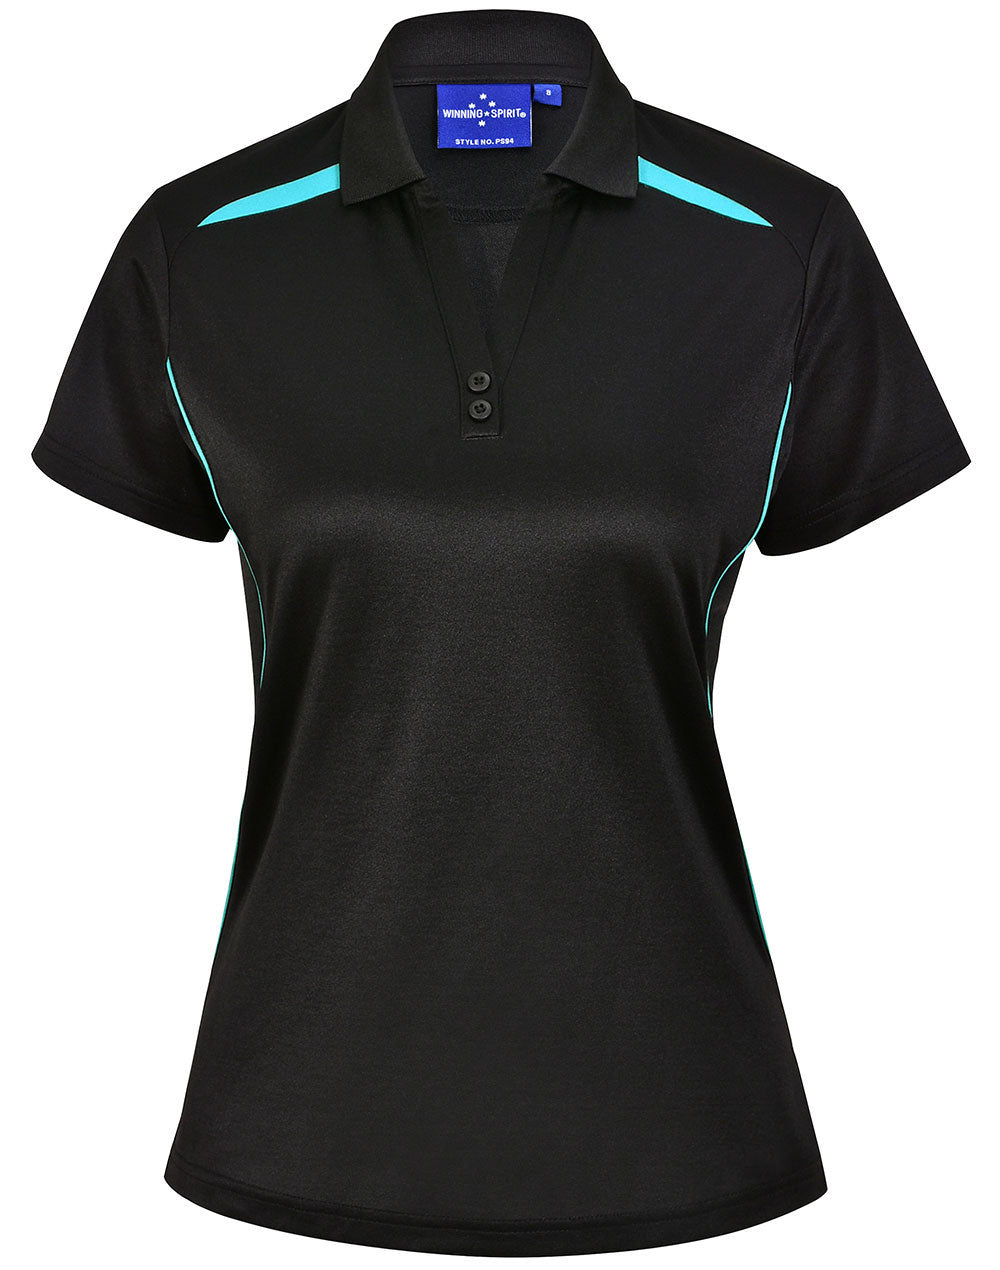 Winning Spirit Women's Sustainable Poly-Cotton Contrast Polo PS94 Casual Wear Winning Spirit Black/Teal 6 